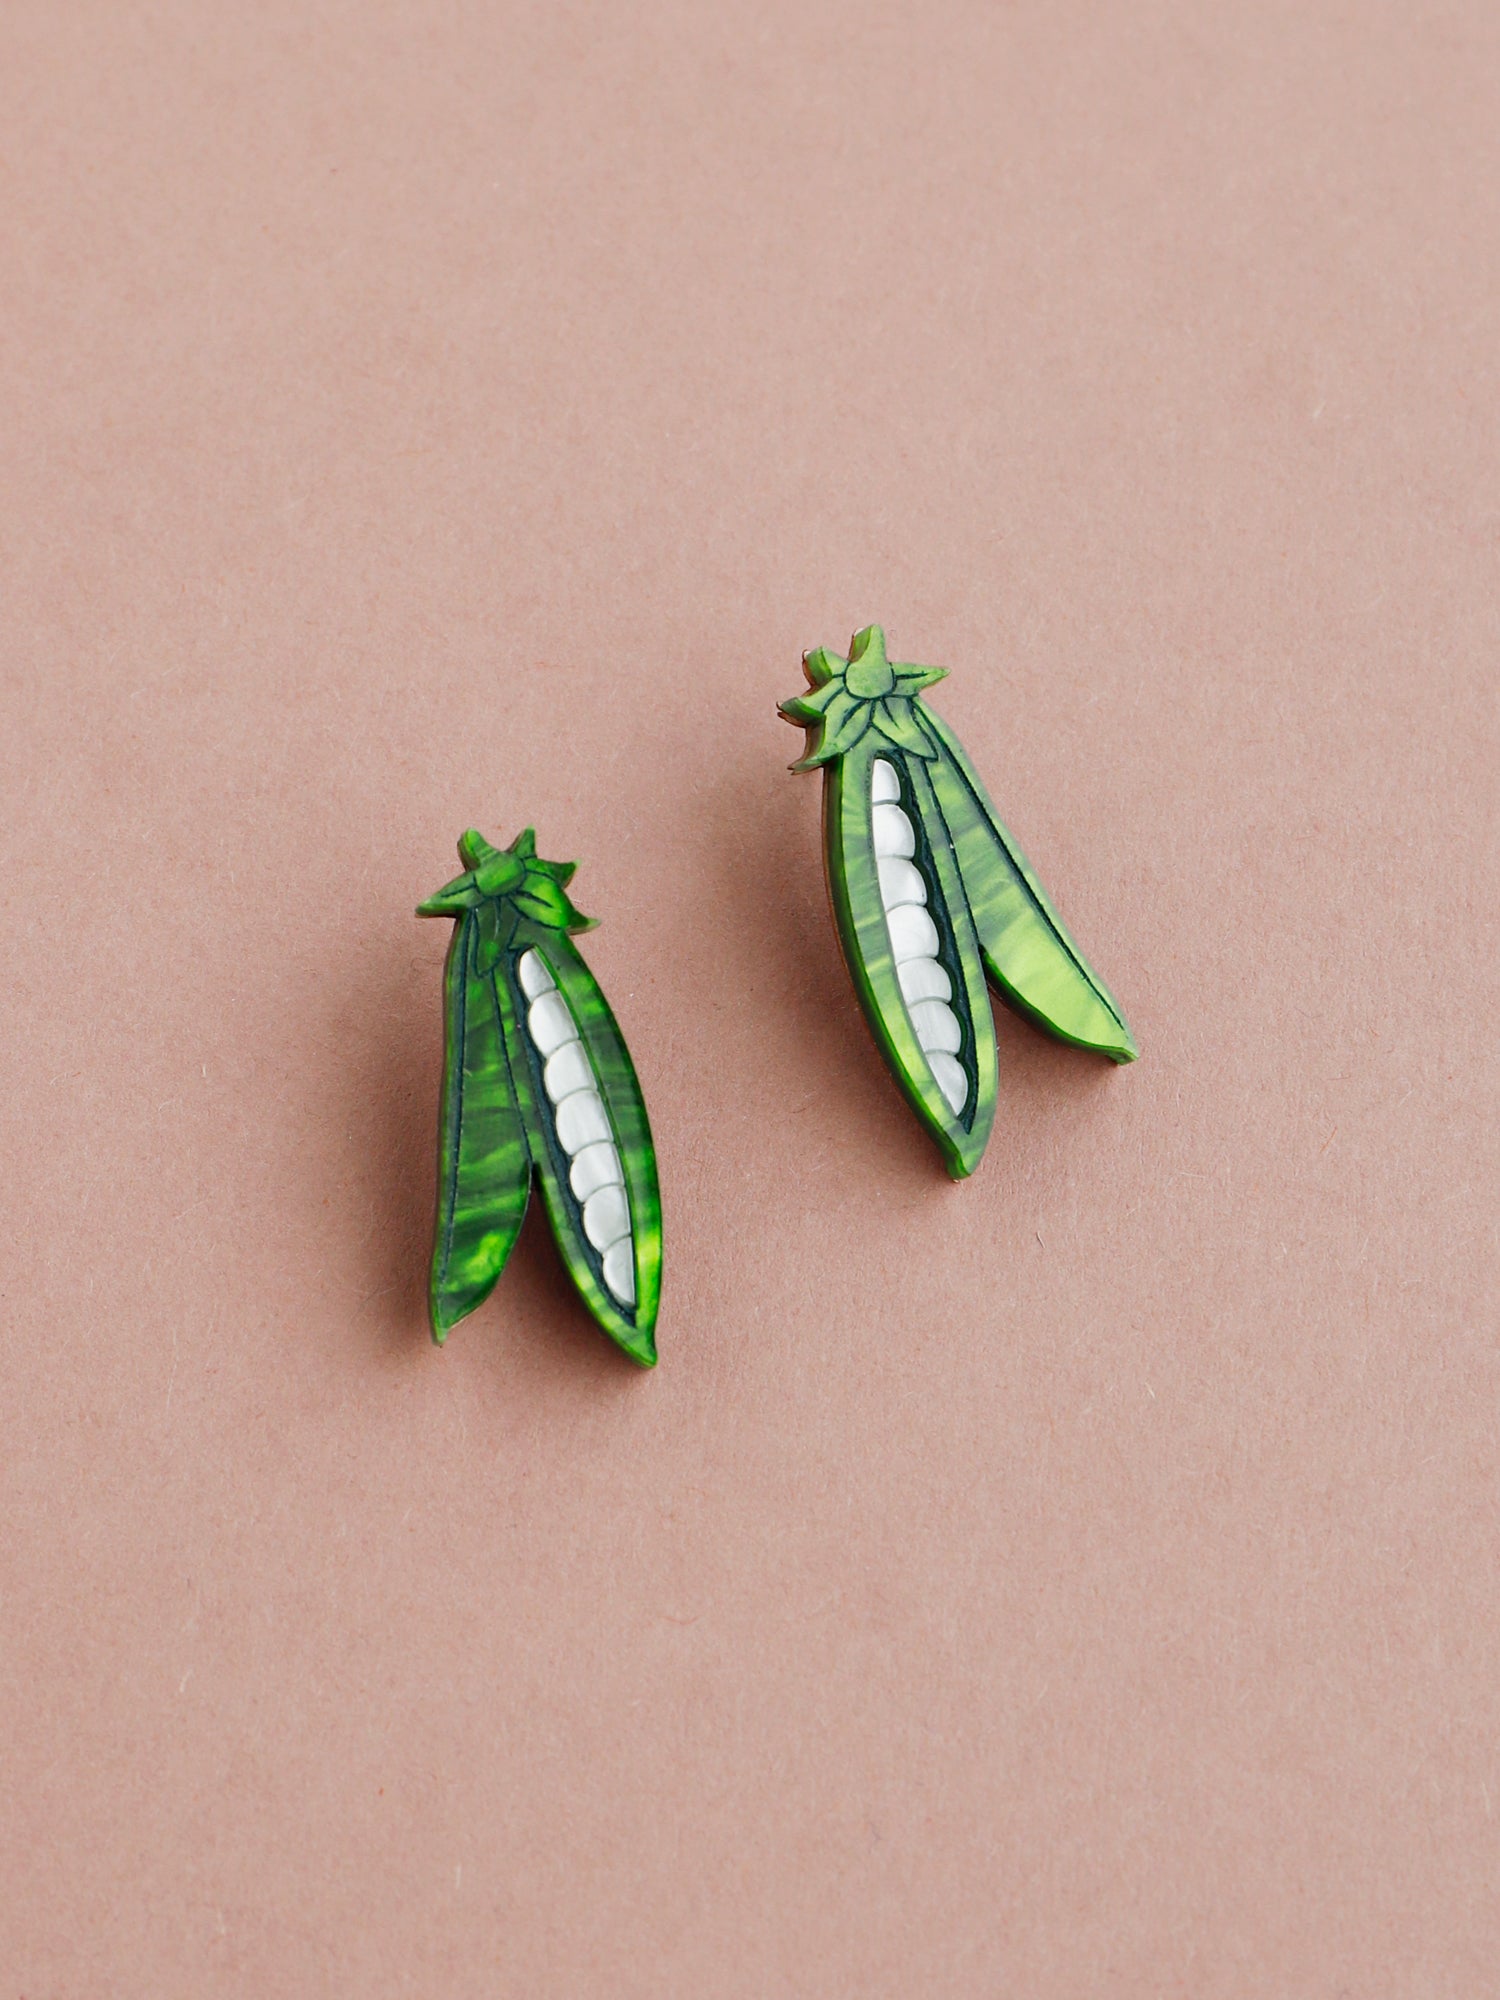 Peas in a pod stud earrings made from marbled acrylic, wood with comfortable sterling silver clips. Handmade in London by Wolf & Moon.